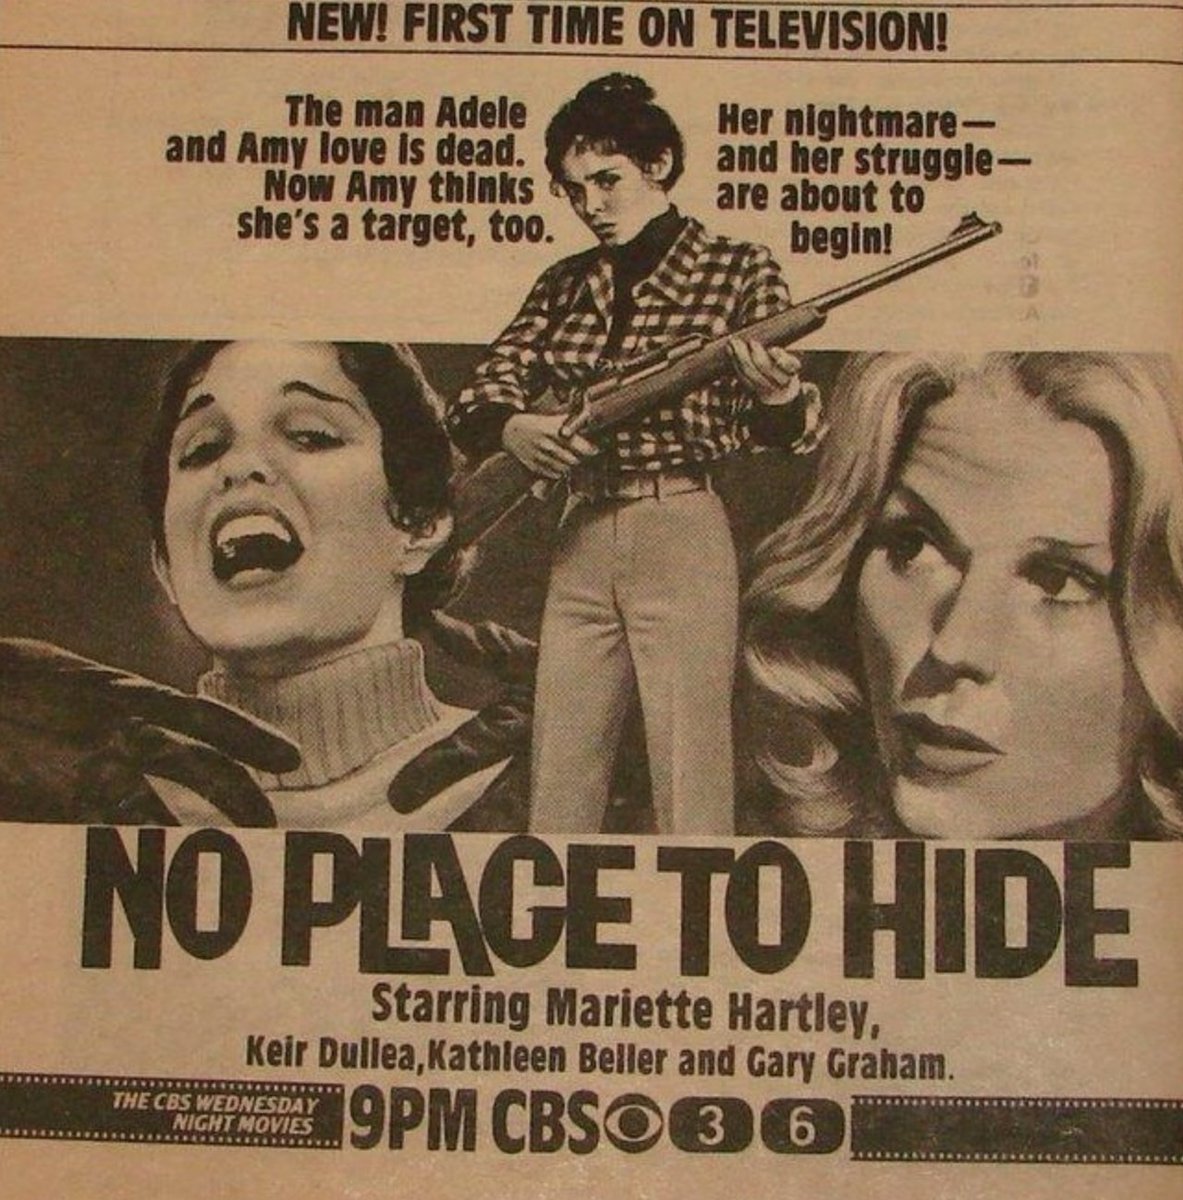 The Final Girl transformation is captured beautifully in the TV Guide ad promoting the premiere of No Place to Hide on March 4, 1981, and for once, there's truth in advertising! See No Place to Hide on YT. Someone uploaded the original broadcast: 